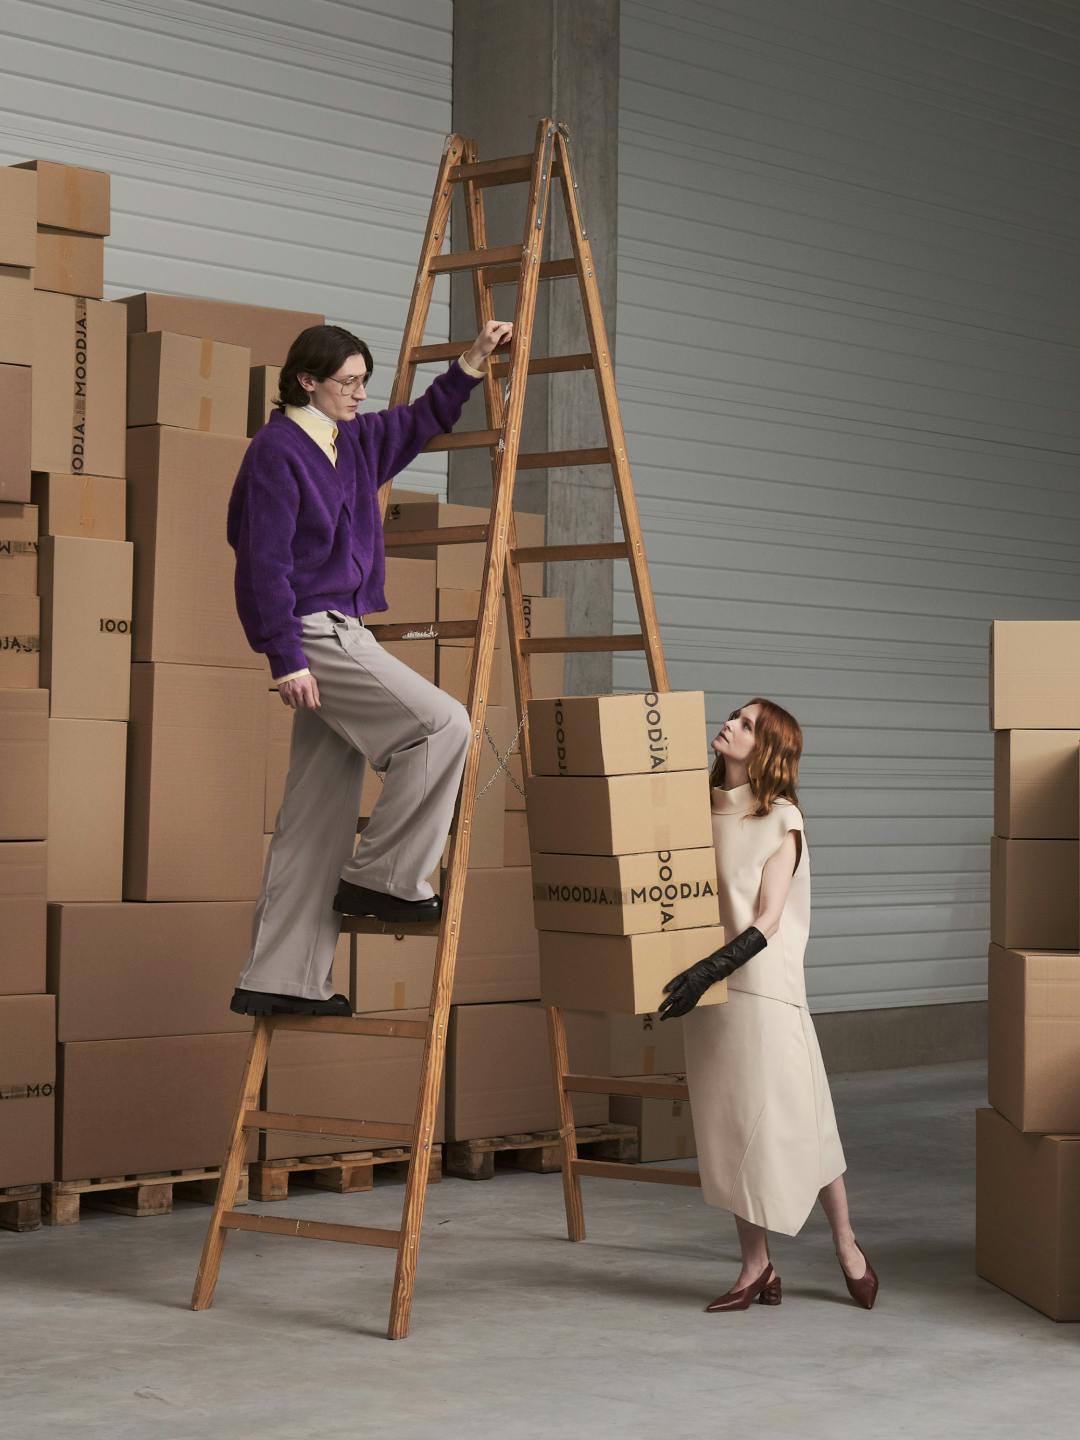 Live models carry boxes and climb ladder